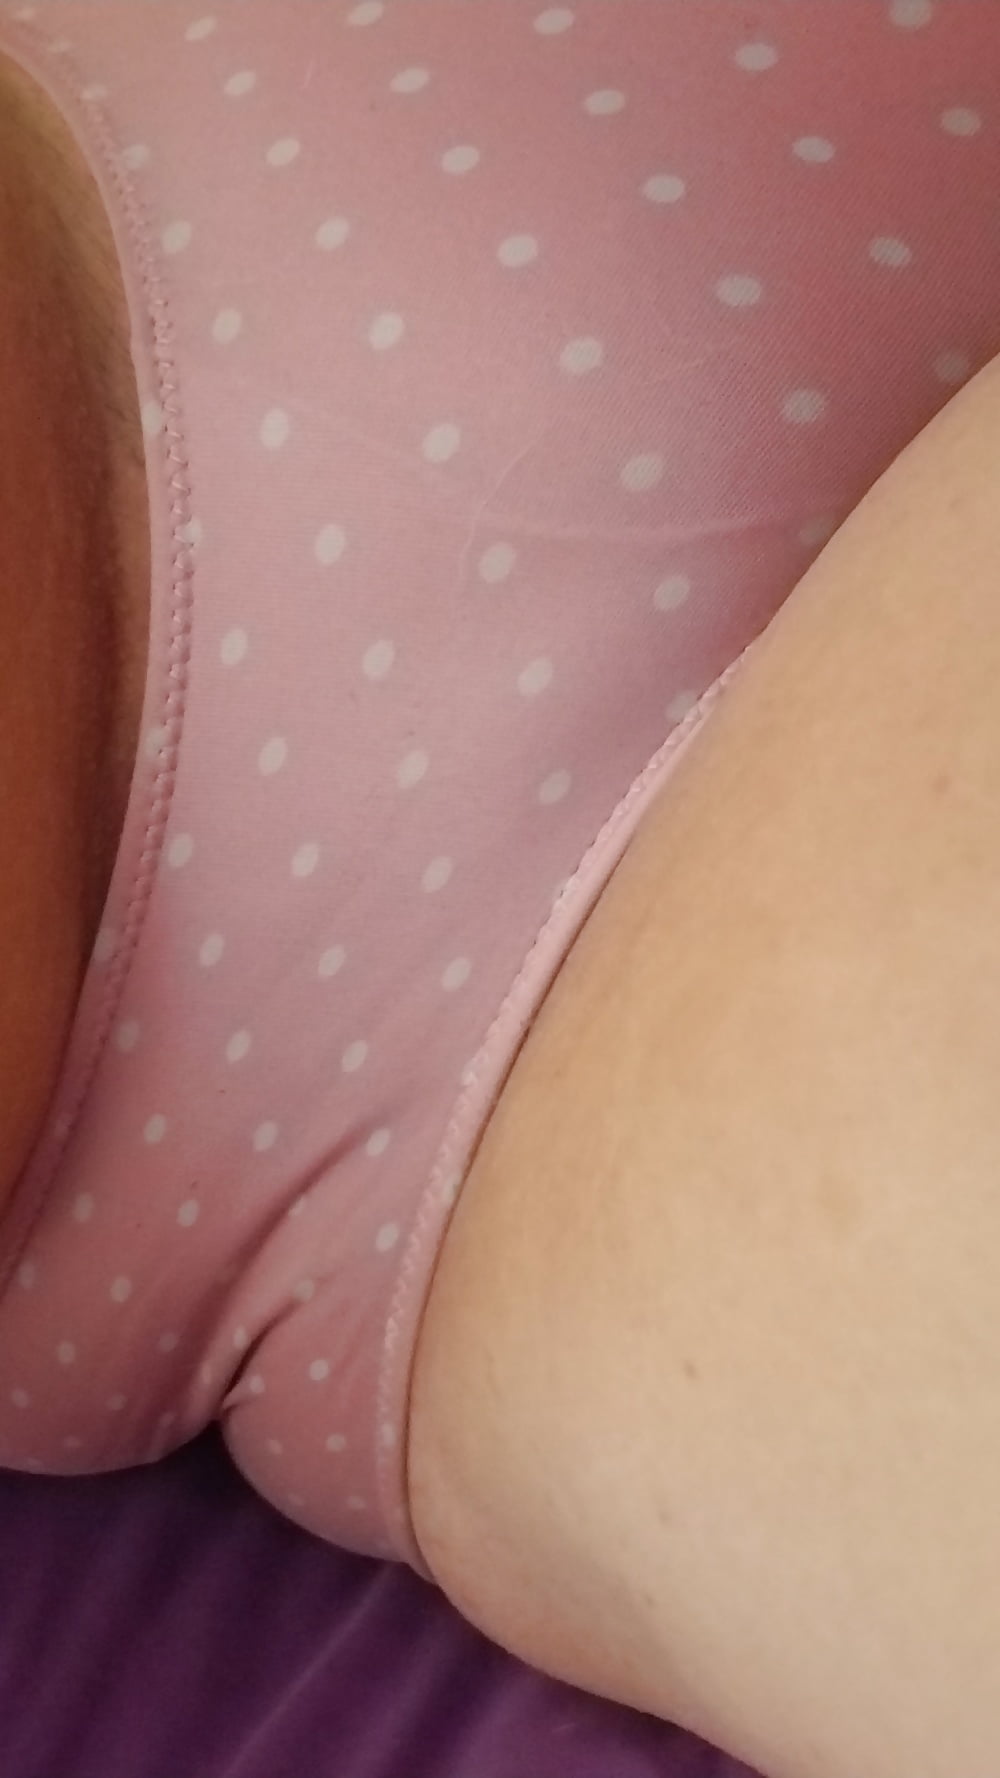 Pretty in pink.... the dainty side coming out play milf wife #106727799